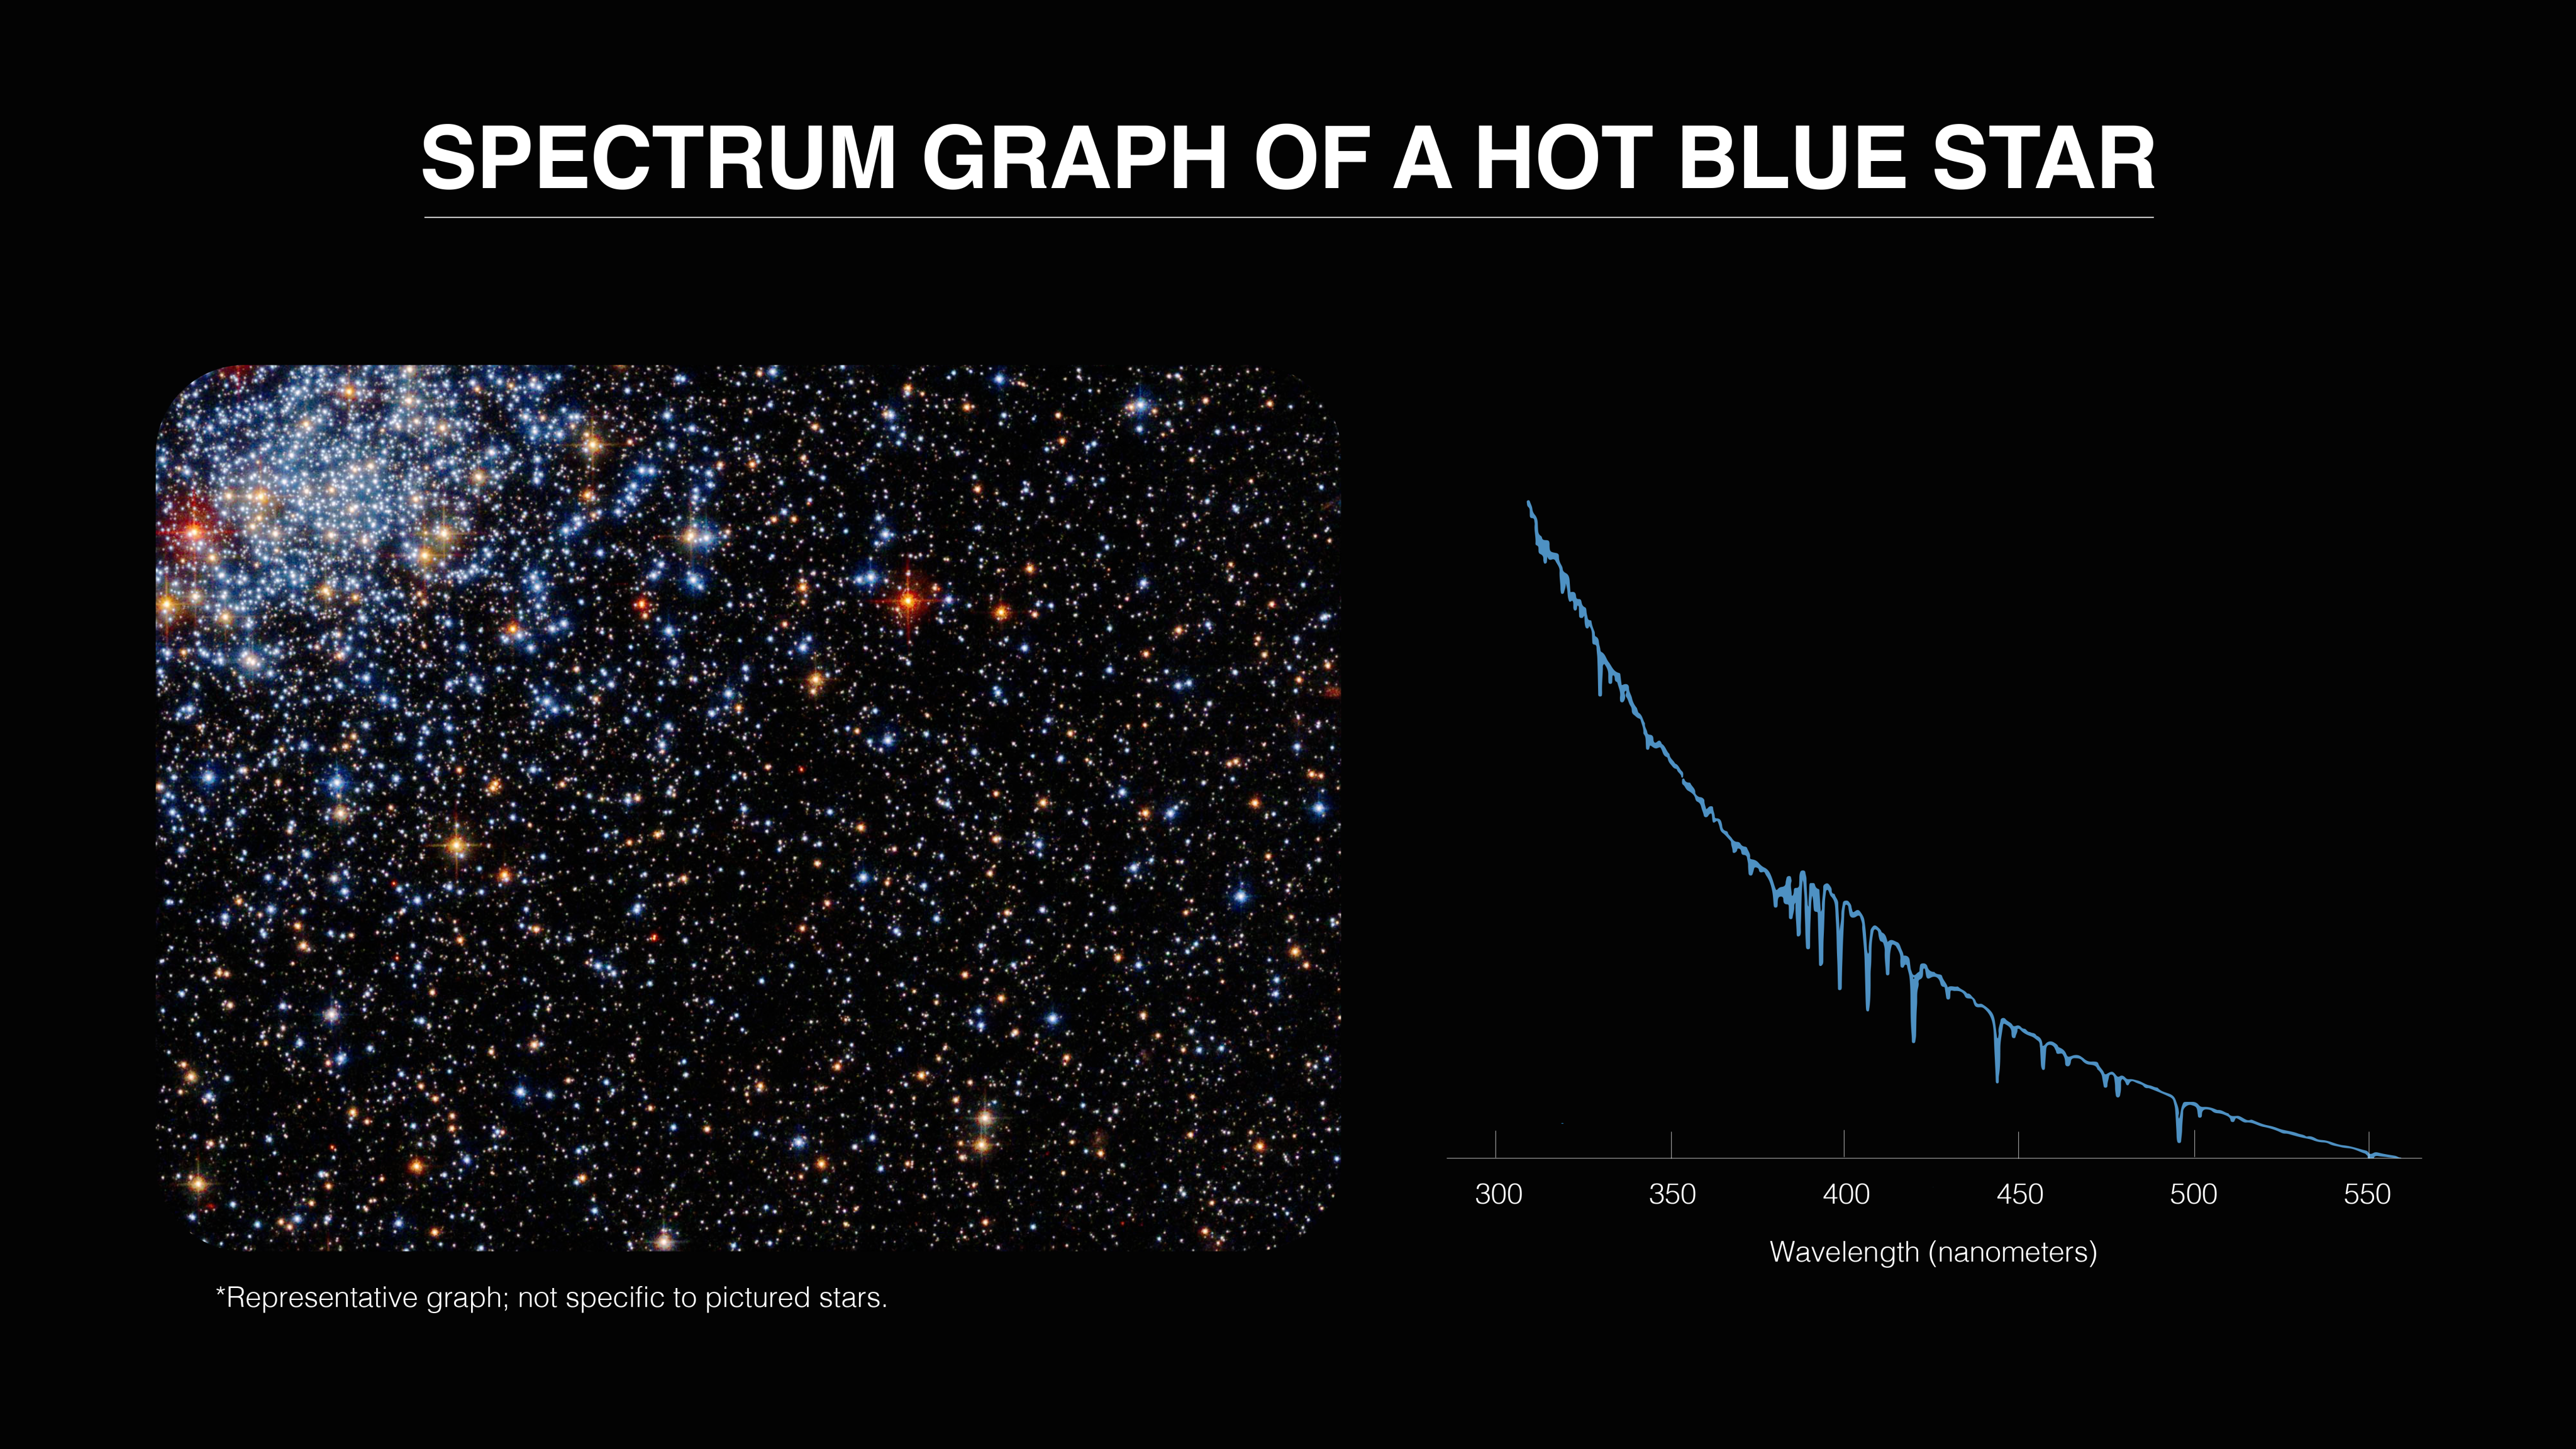 An image of a star cluster with a blue graph to its right representing its spectra. There is a black background with white text reading "Spectrum Graph of a Hot Blue Star."